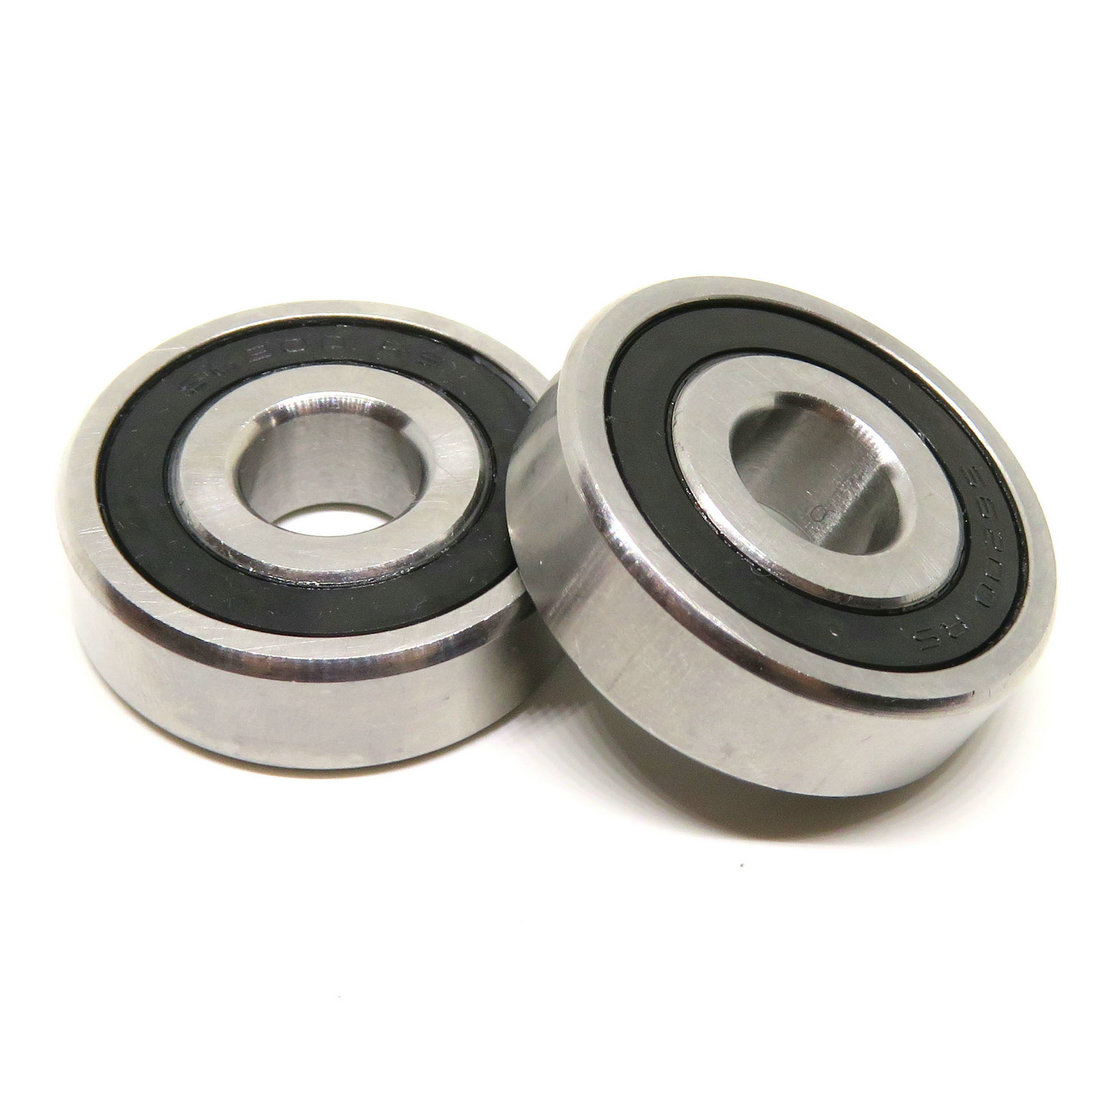 S6301-2RS Stainless Steel Sealed Bearing 12x37x12 Deep groove Ball Bearings S6301RS.jpg